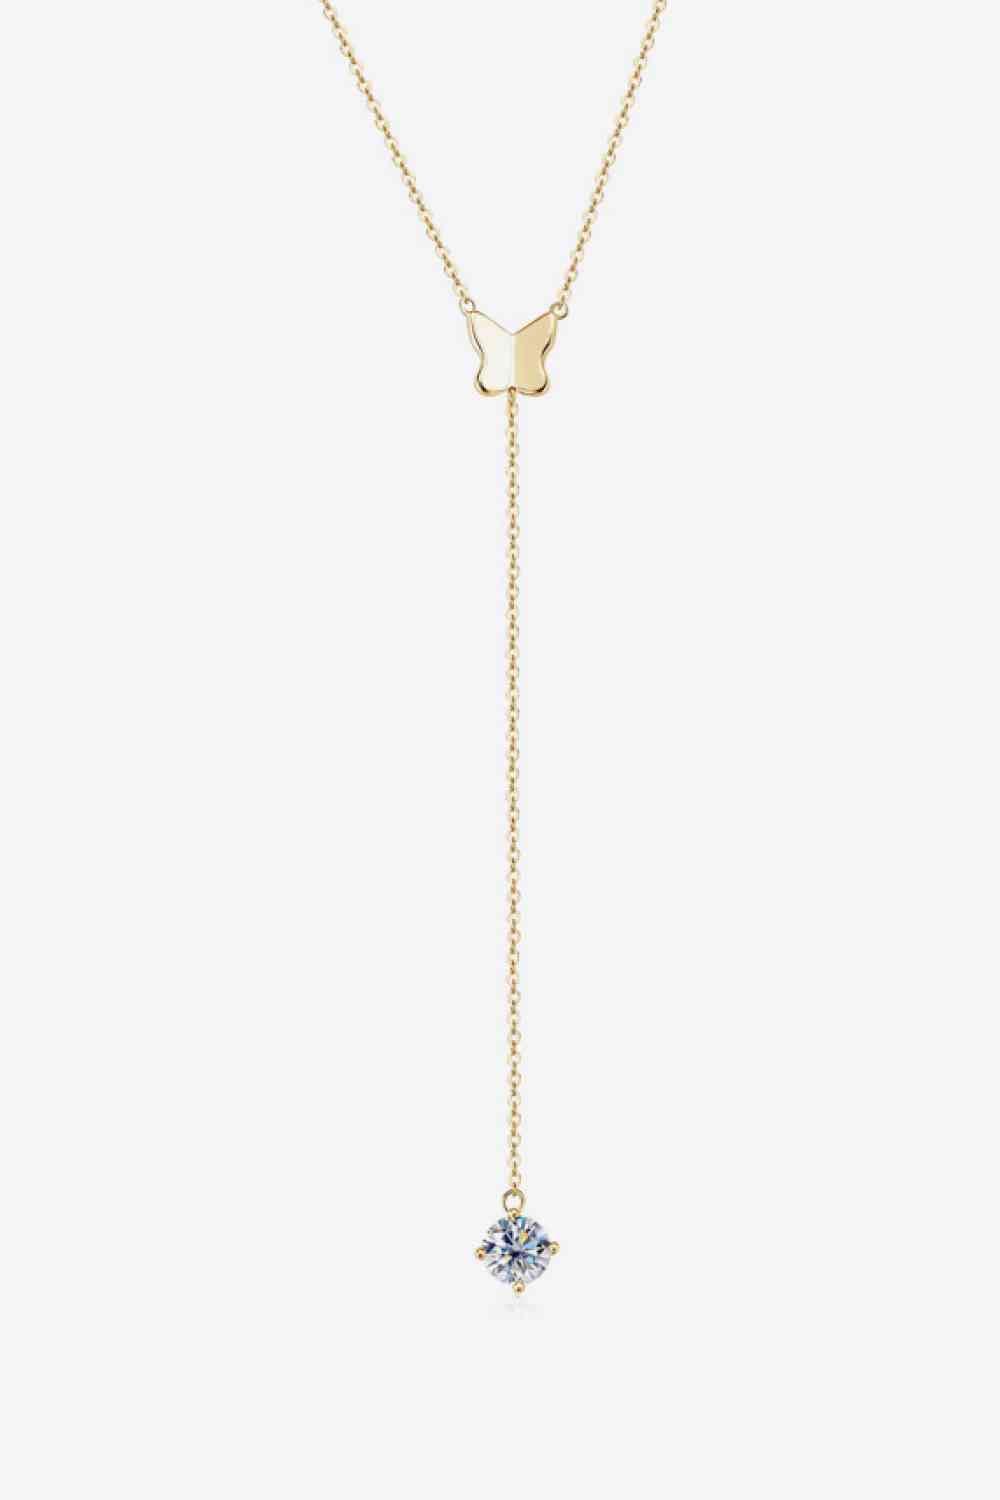 a gold necklace with a blue stone hanging from it